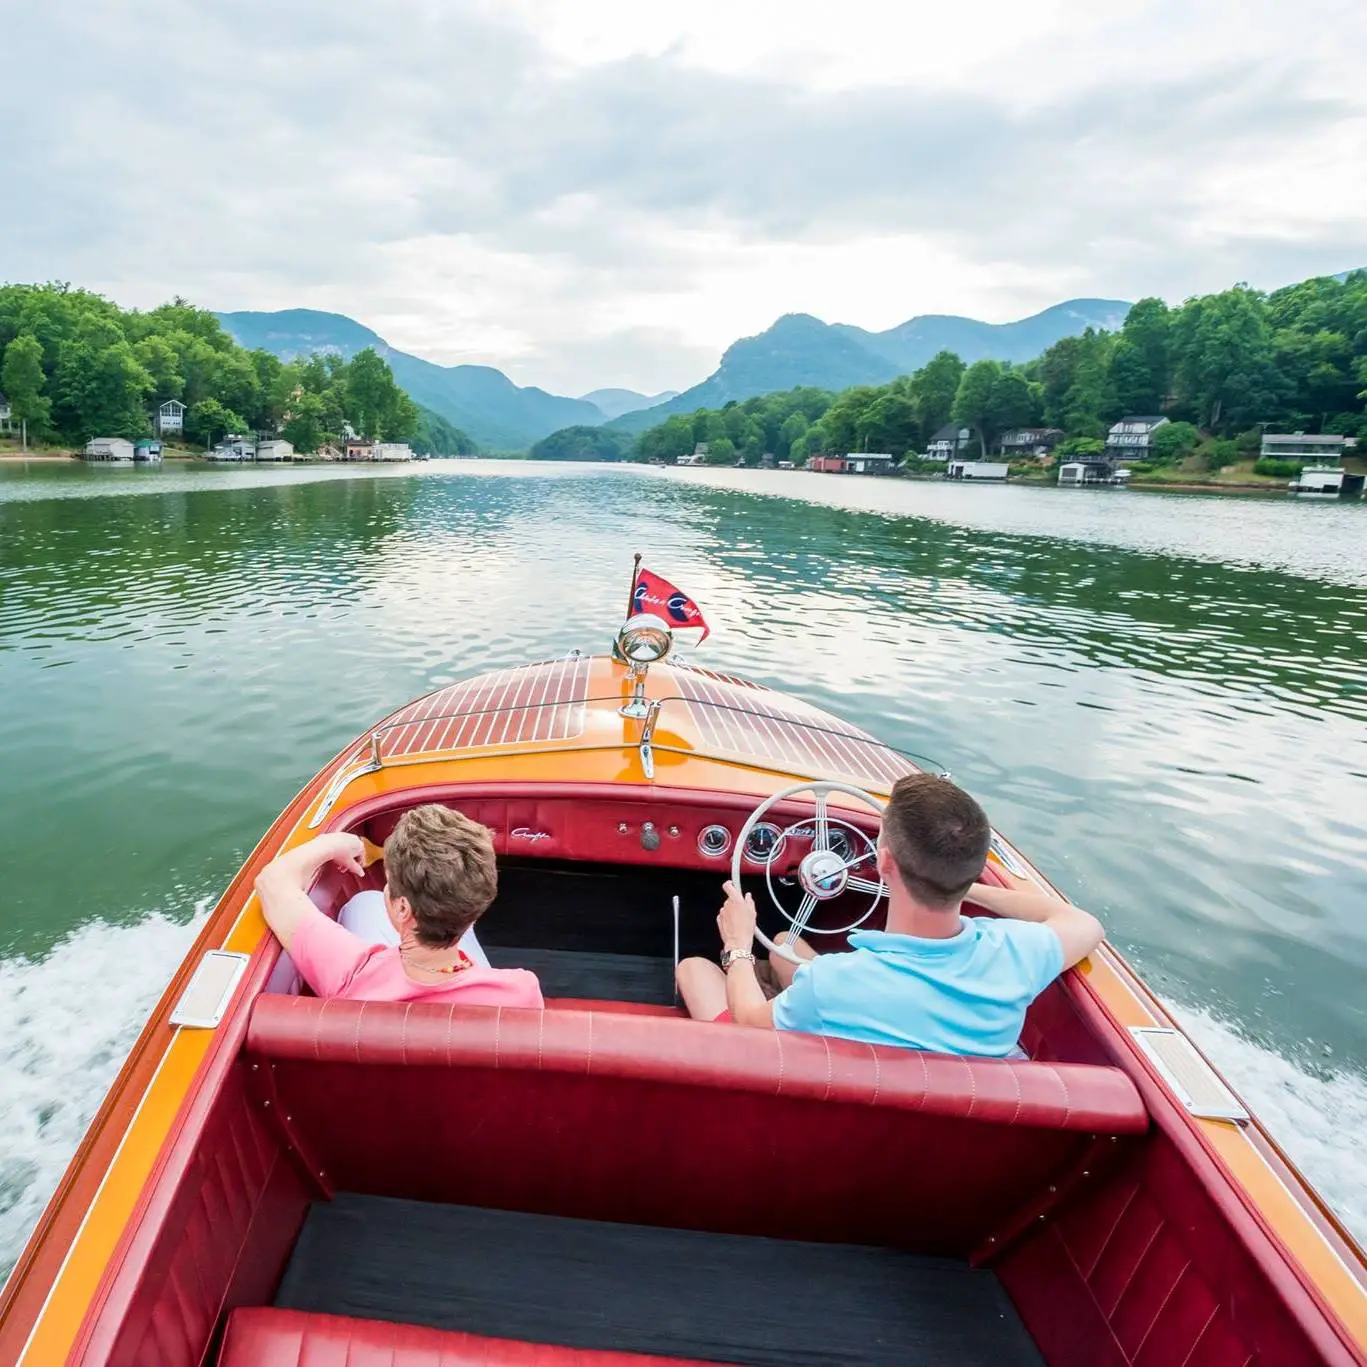 Classic Boat Parade on Lake Lure